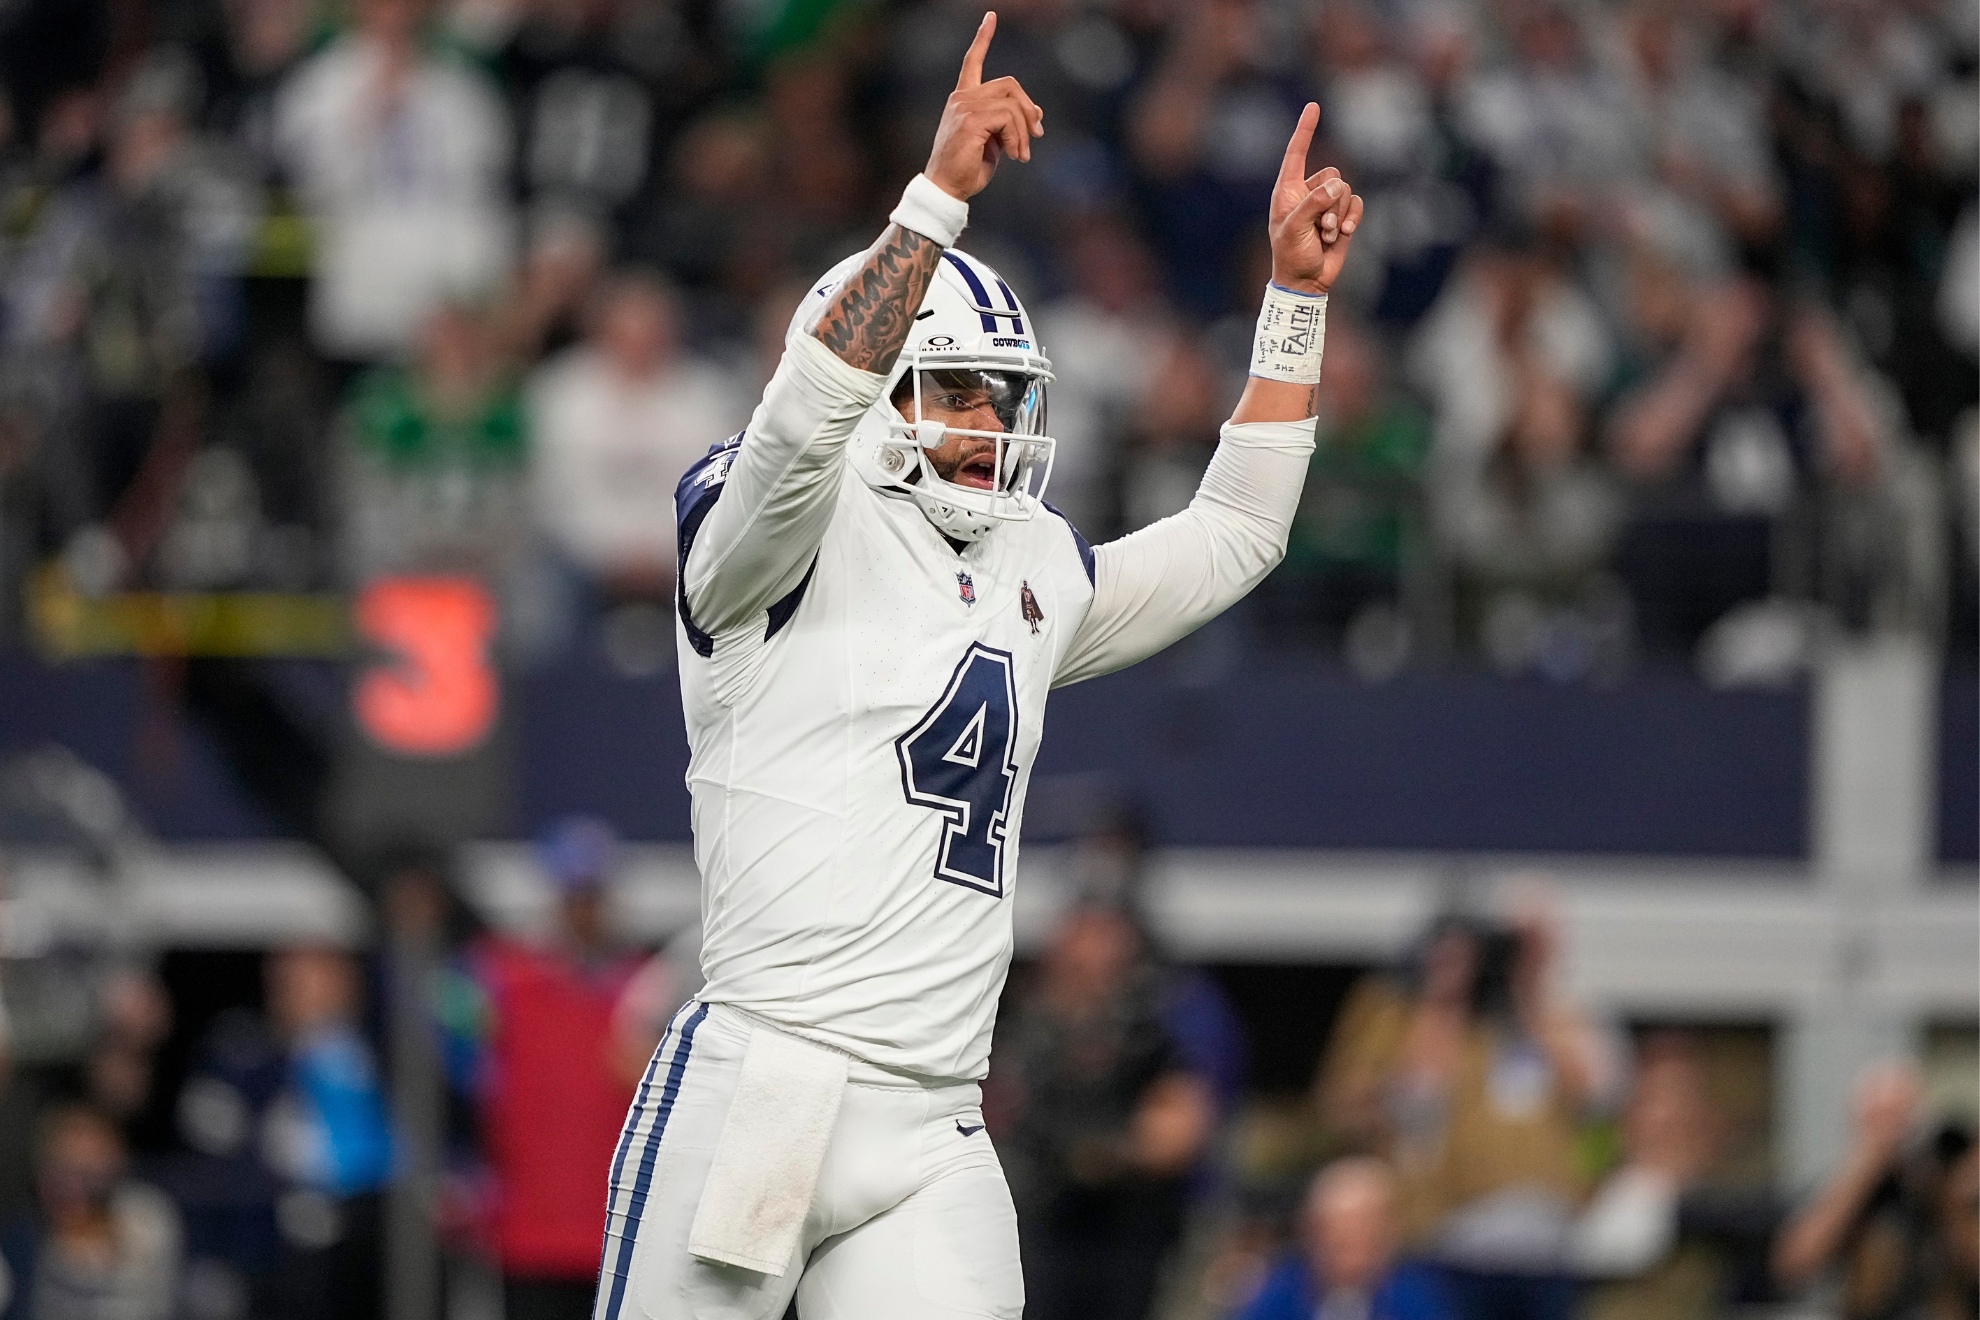 Dak Prescott and the Cowboys offense built a big first-half lead and never looked back.